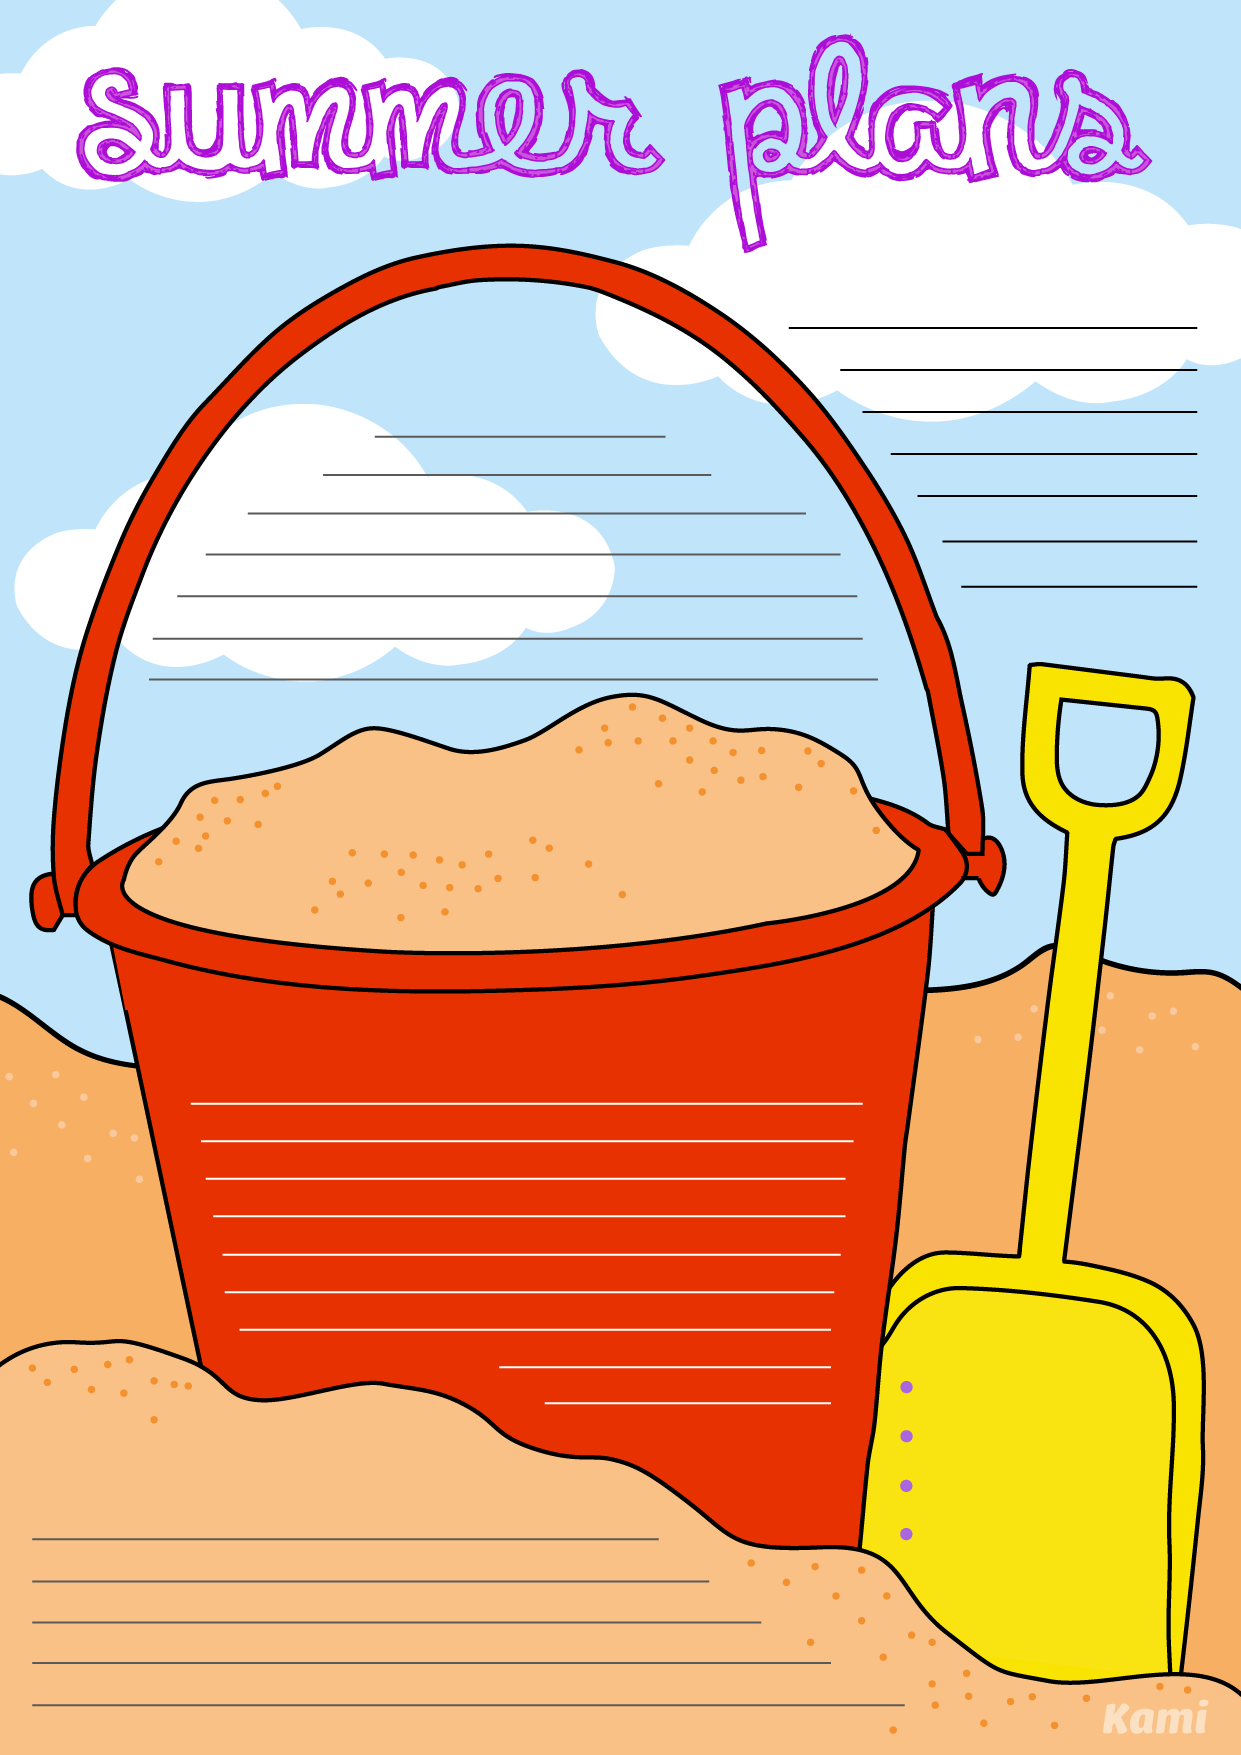 An image of a bucket on a beach with blank spaces